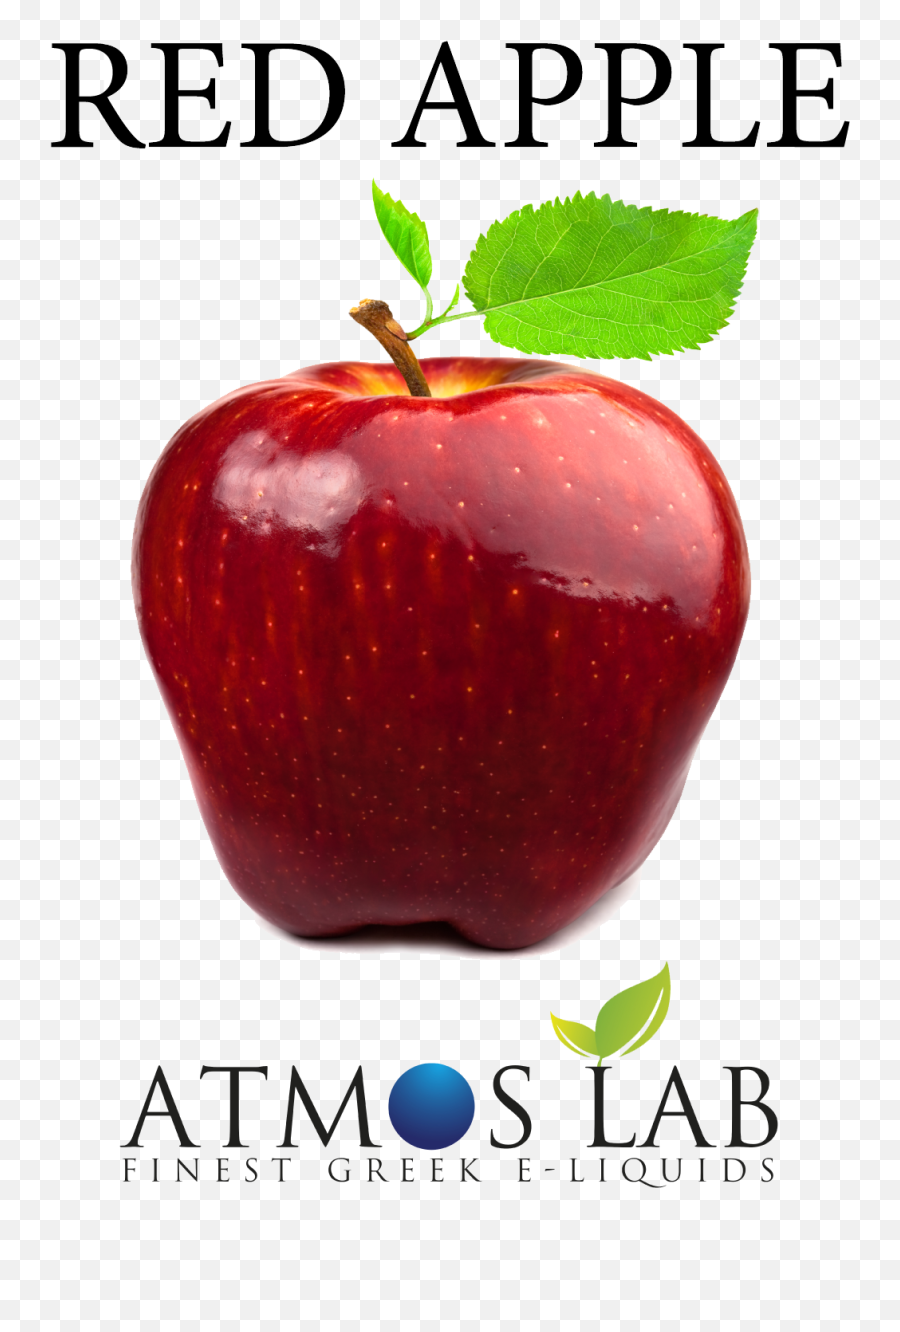 Public Domain Image Apples - Clip Art Library Atmos Lab Emoji,Red Apple Clipart